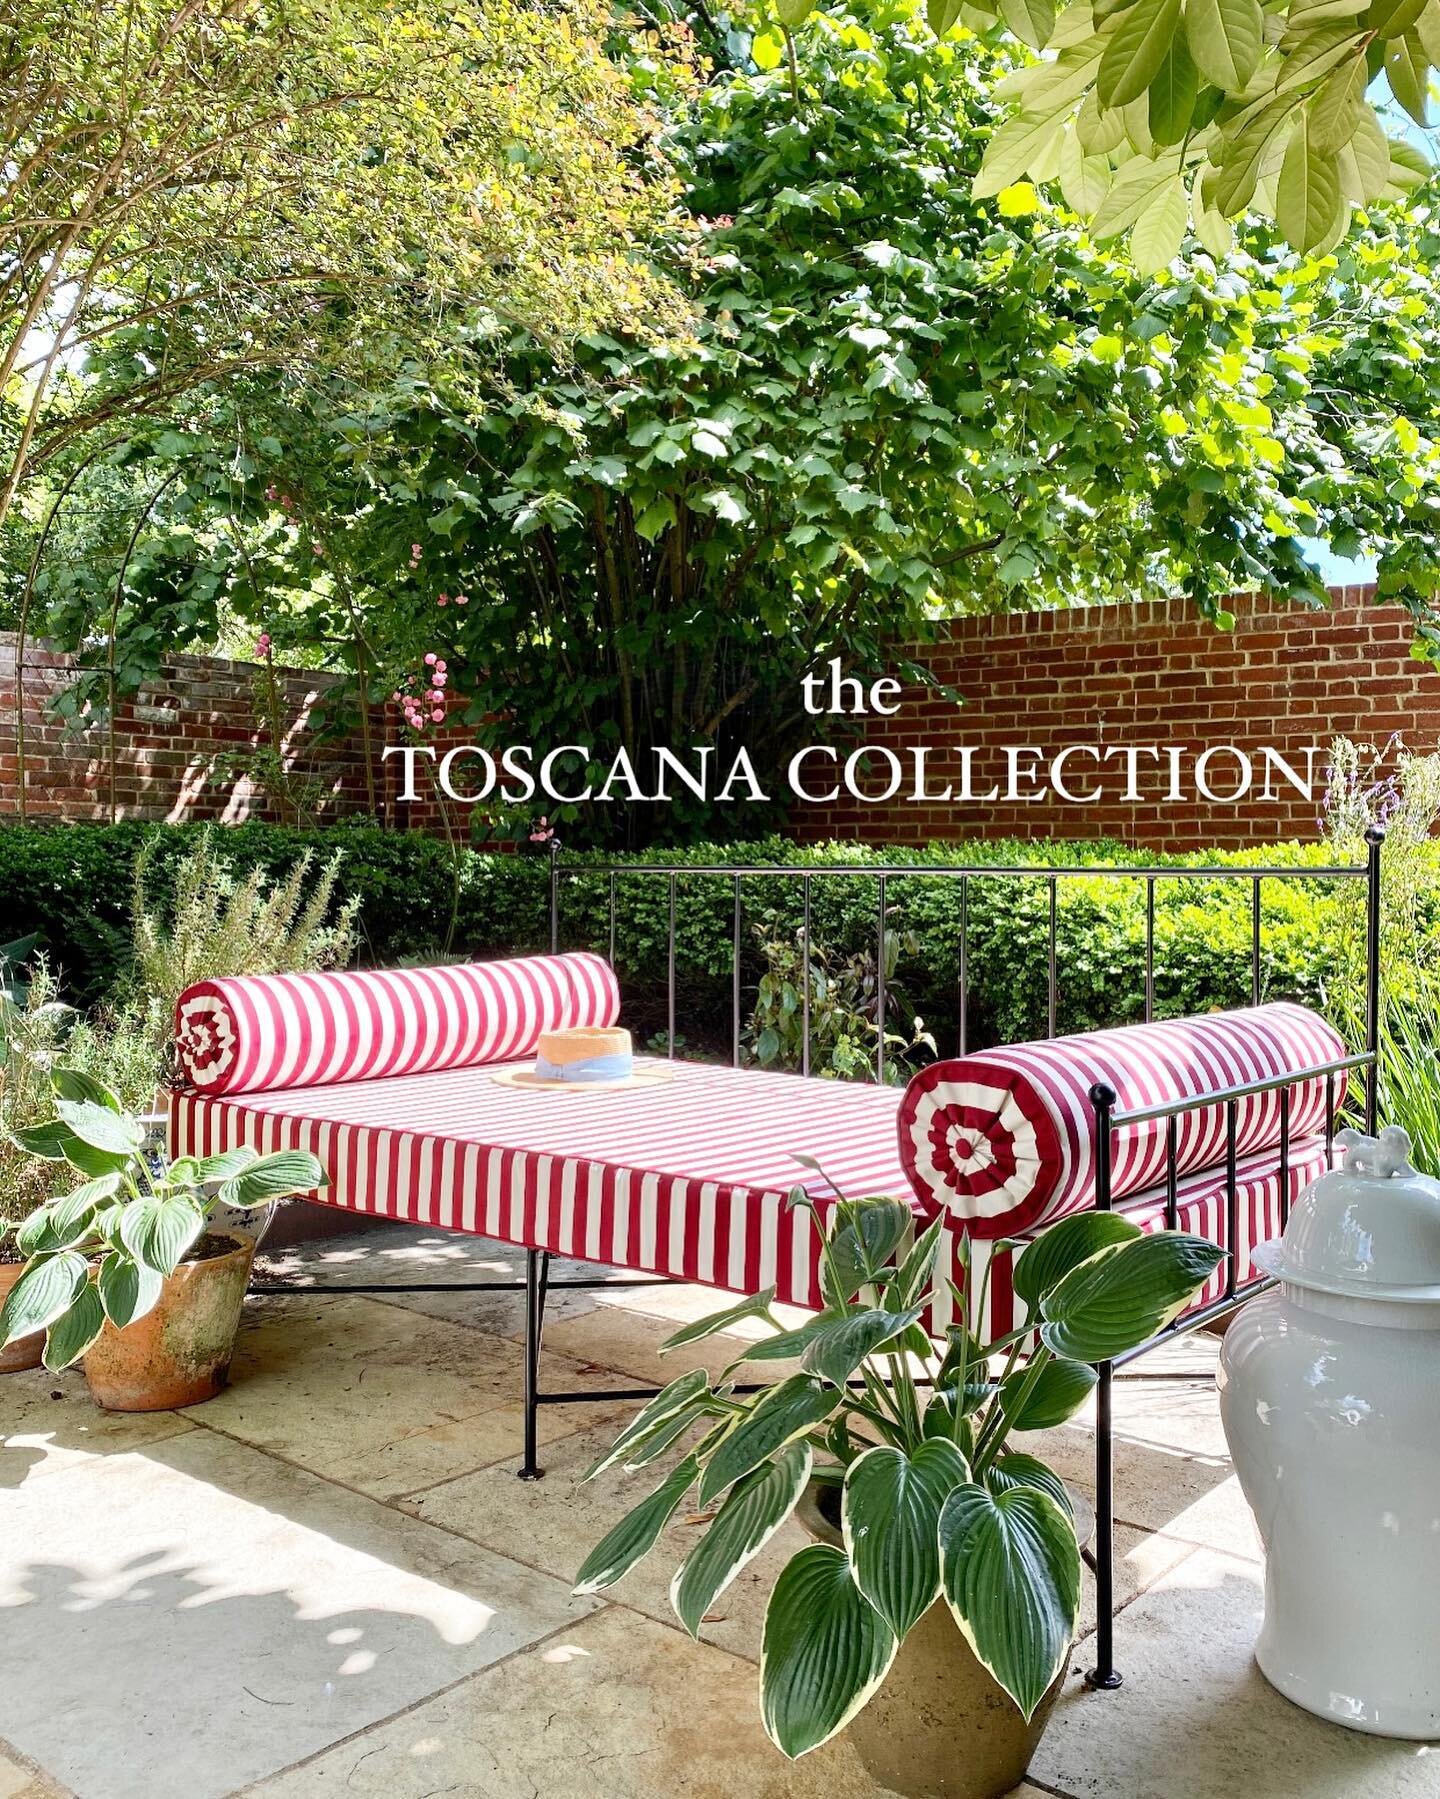 ✨ Original designs by Relic Interiors, the Toscana Collection is inspired by classical pieces with sleek lines and timeless shapes. Fit for an Arch Digest worthy garden these oversized outdoor loungers, sofas and daybeds help make your outdoor space 